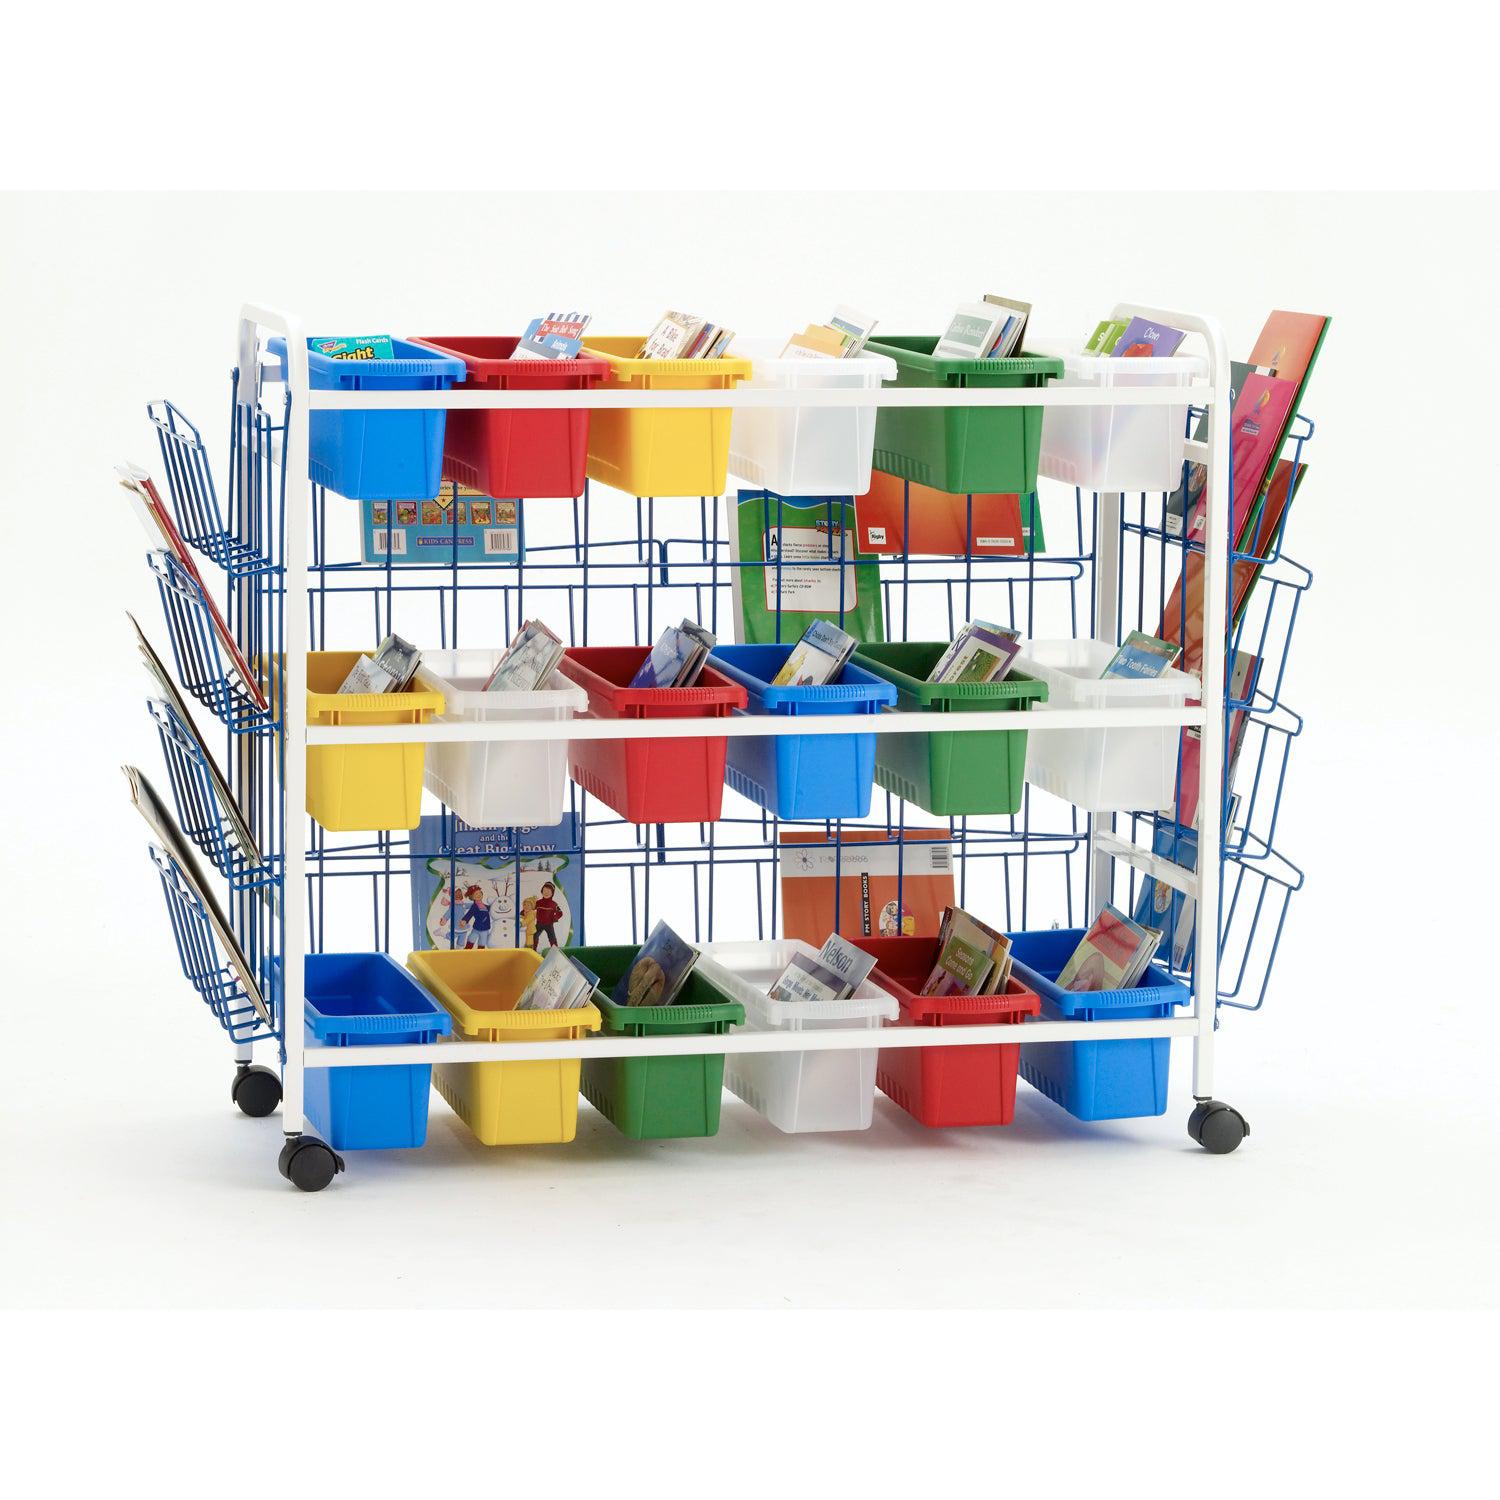 Deluxe Leveled Reading Book Browser Cart with 18 Small Open Tubs, Book Rack and Side Racks